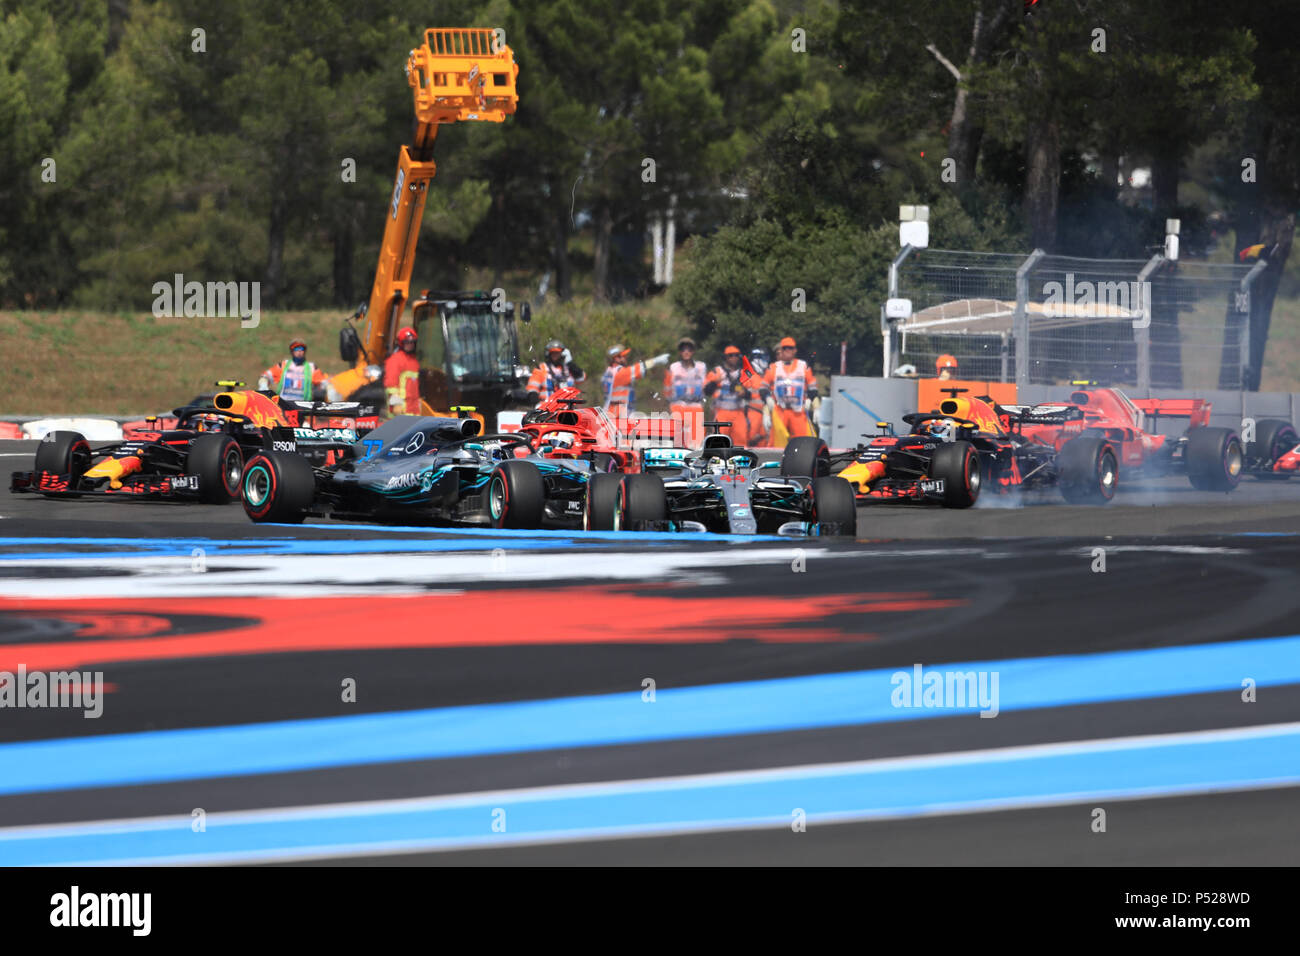 Le Castellet, France. 24 June 2018.  French Formula One Grand Prix, race day; Mercedes AMG Petronas Motorsport, Lewis Hamilton leads as Vettel causes a collission with Bottas Credit: Action Plus Sports Images/Alamy Live News Credit: Action Plus Sports Images/Alamy Live News Stock Photo